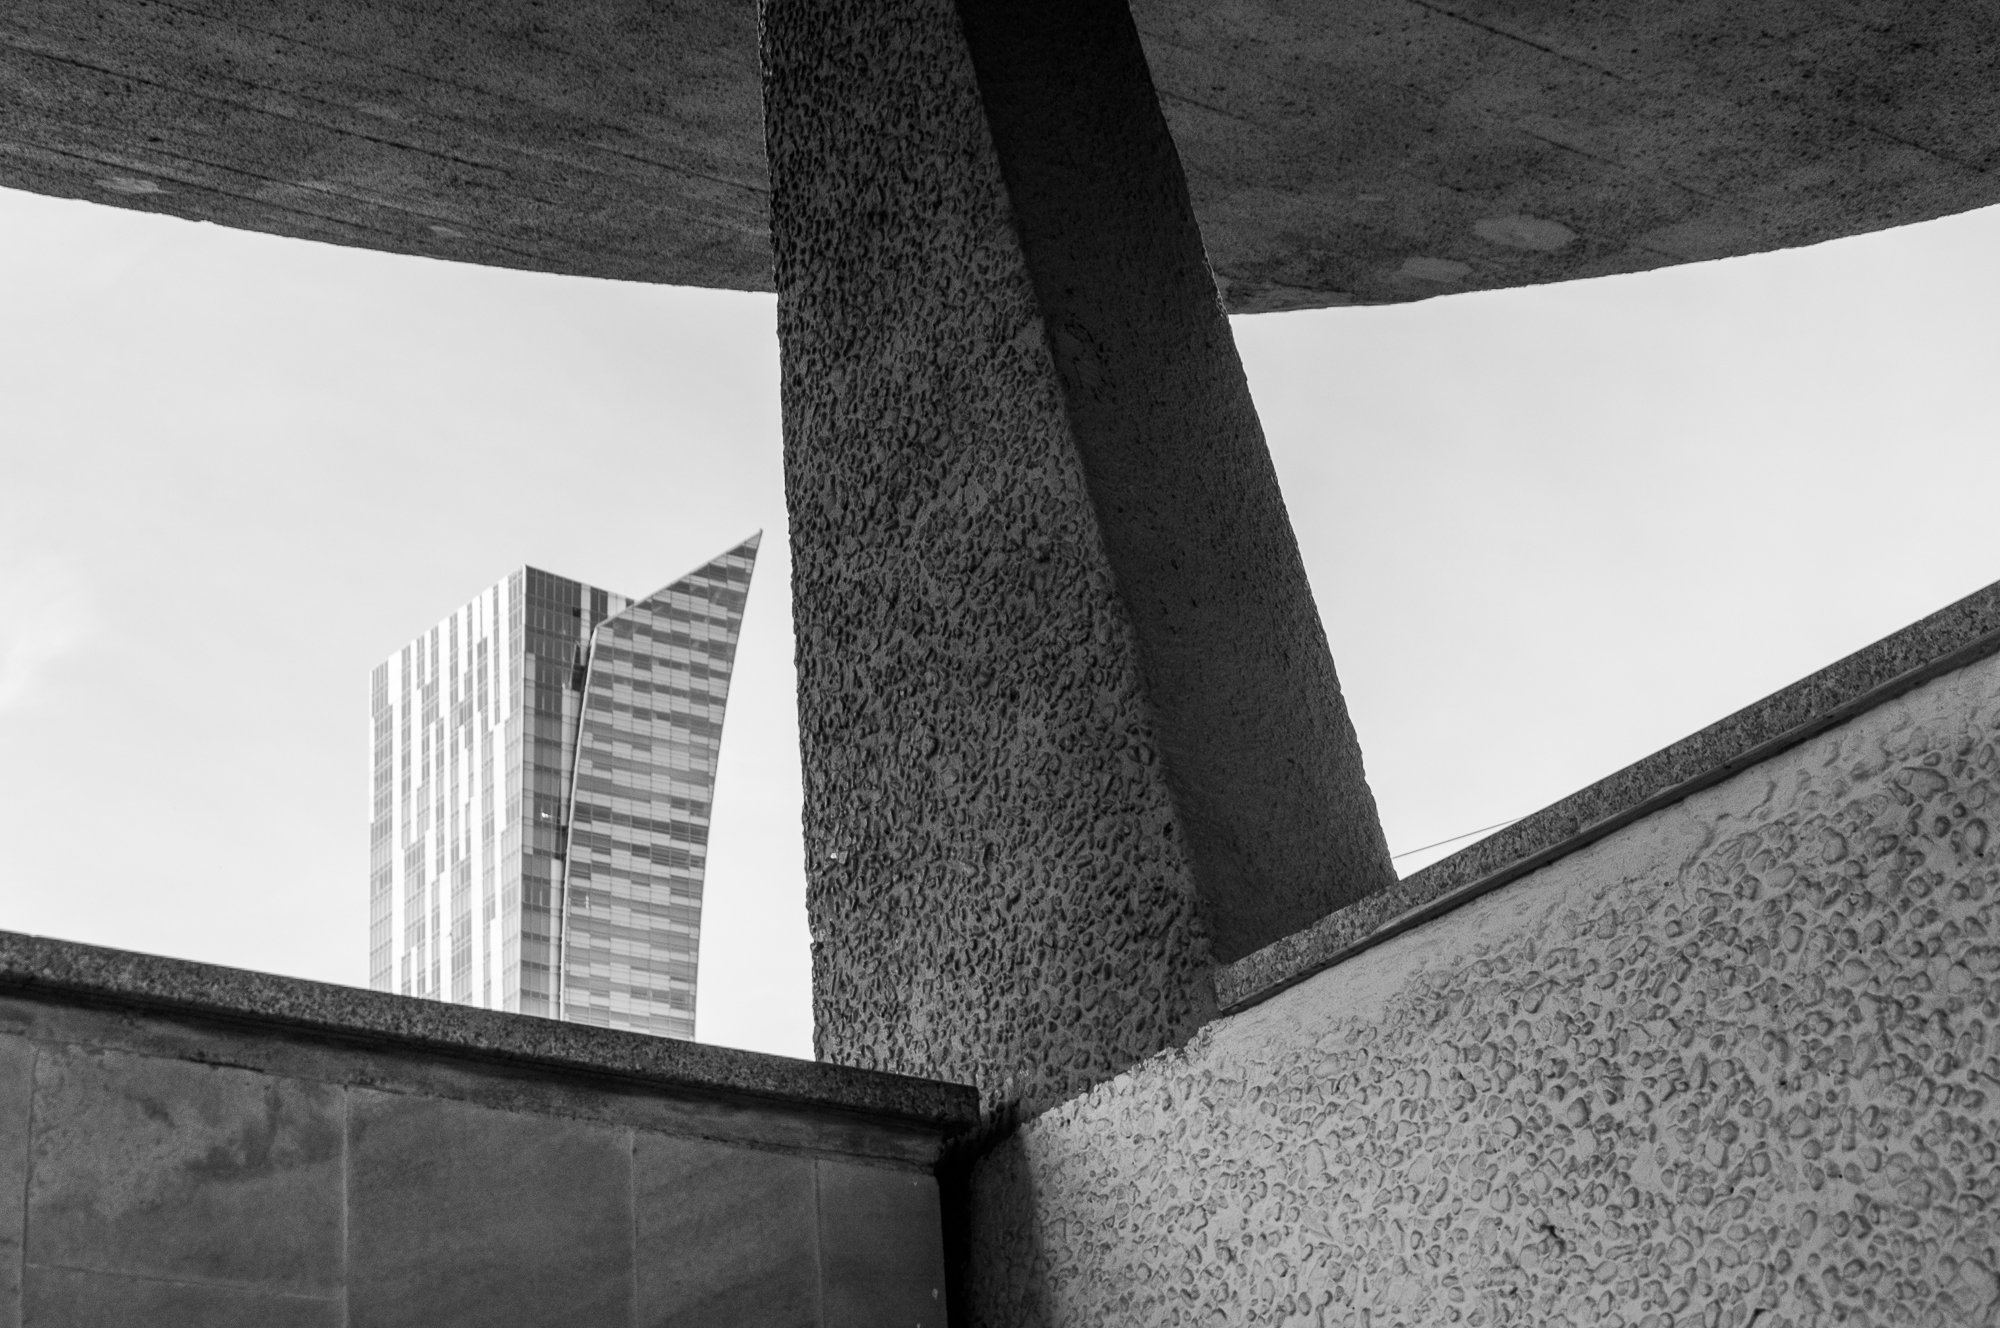 Adam Mazek Photography Warsaw (Warszawa) 2019. Post: "What do I want to do in my life?" Minimalism. Star Wars. Inspired by Lem. Perspective. Architecture.